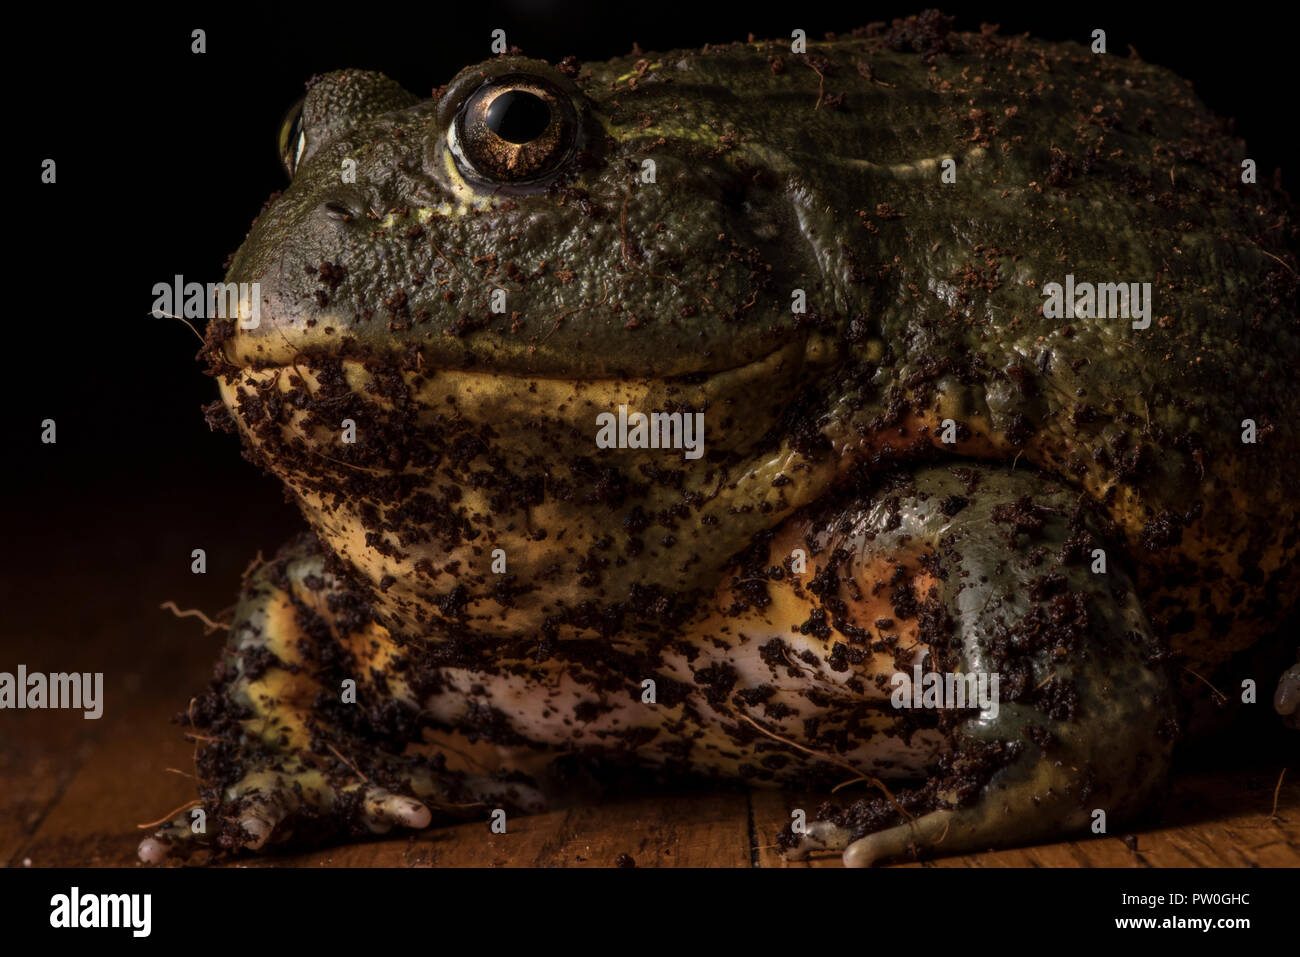 A close up portrait of a captive large male African bull frog (Pyxicephalus adspersus) that is my (the photographers) pet. Stock Photo